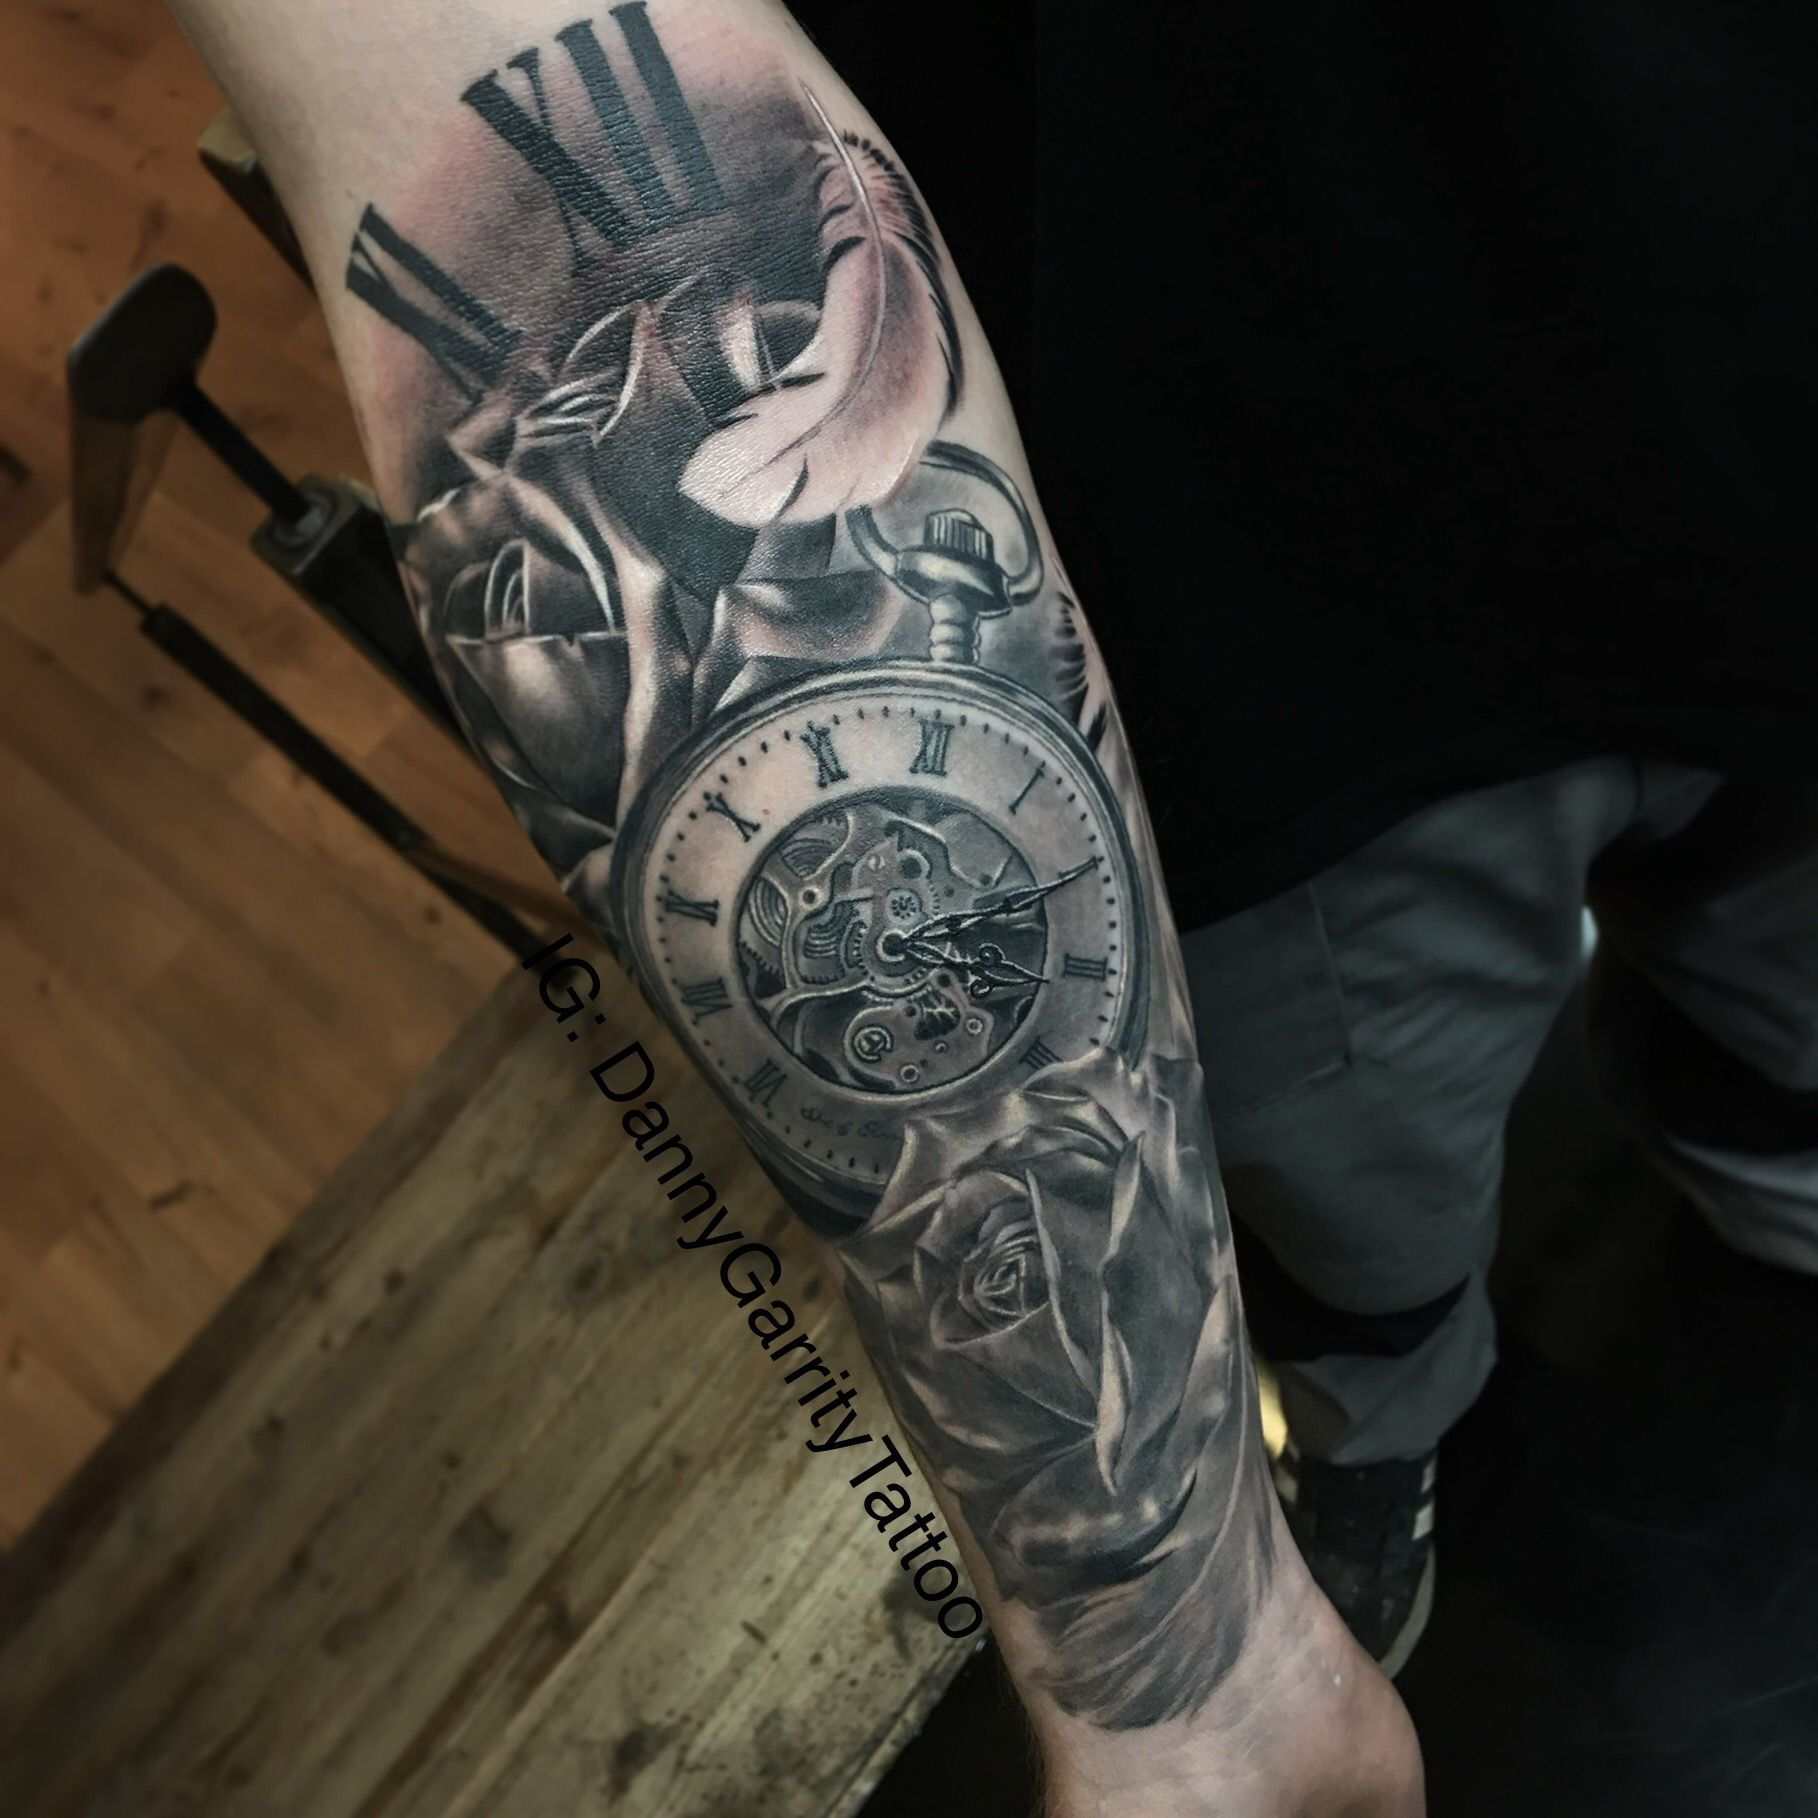 Mens Sleeve Tattoo With Pocket Watch Rose And Feathers Tattoo intended for size 1818 X 1818